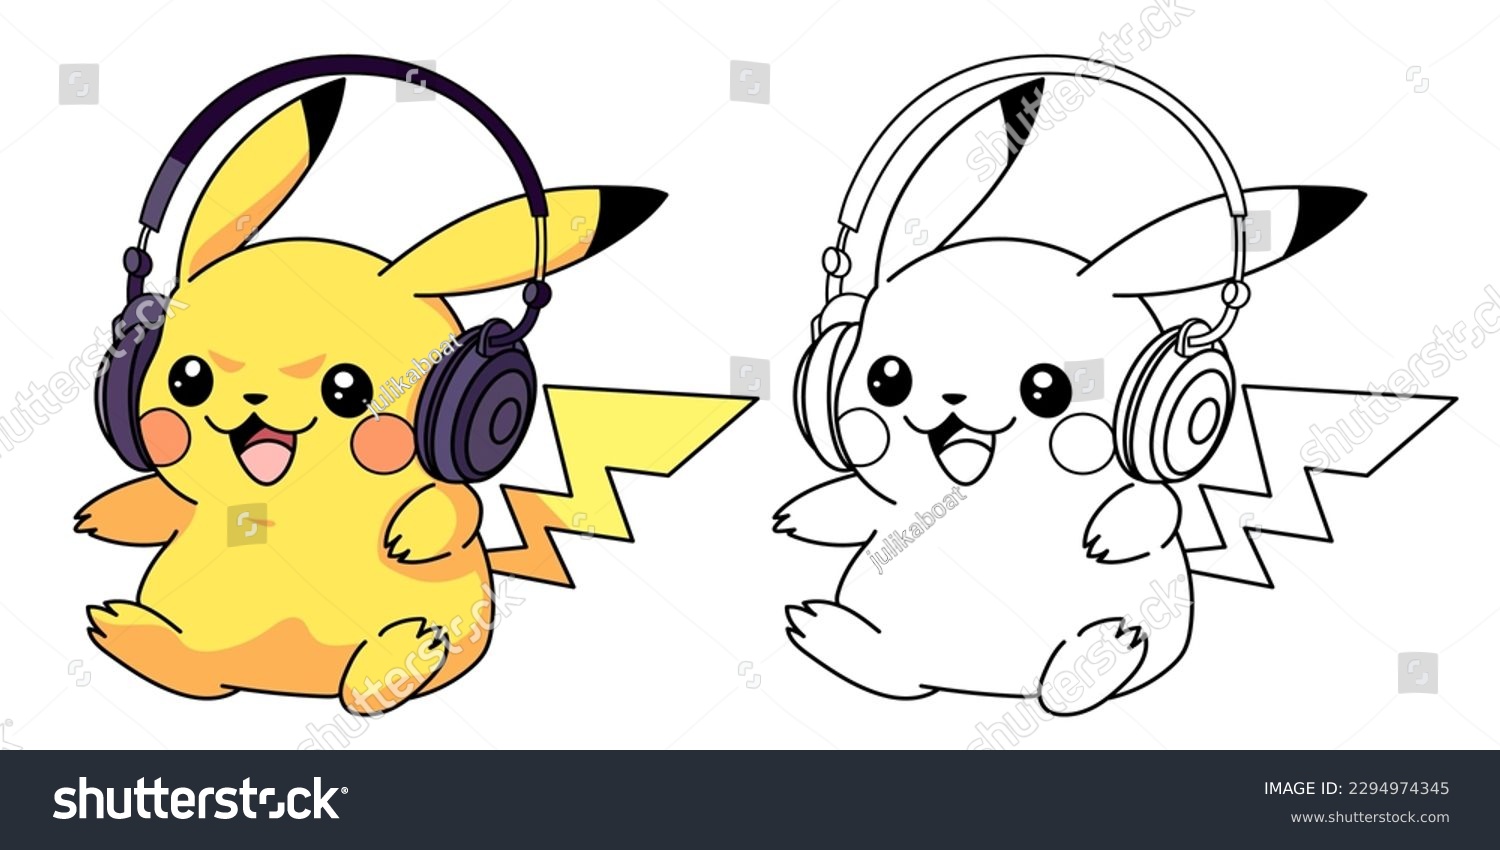 Pokemon coloring pages kids images stock photos d objects vectors